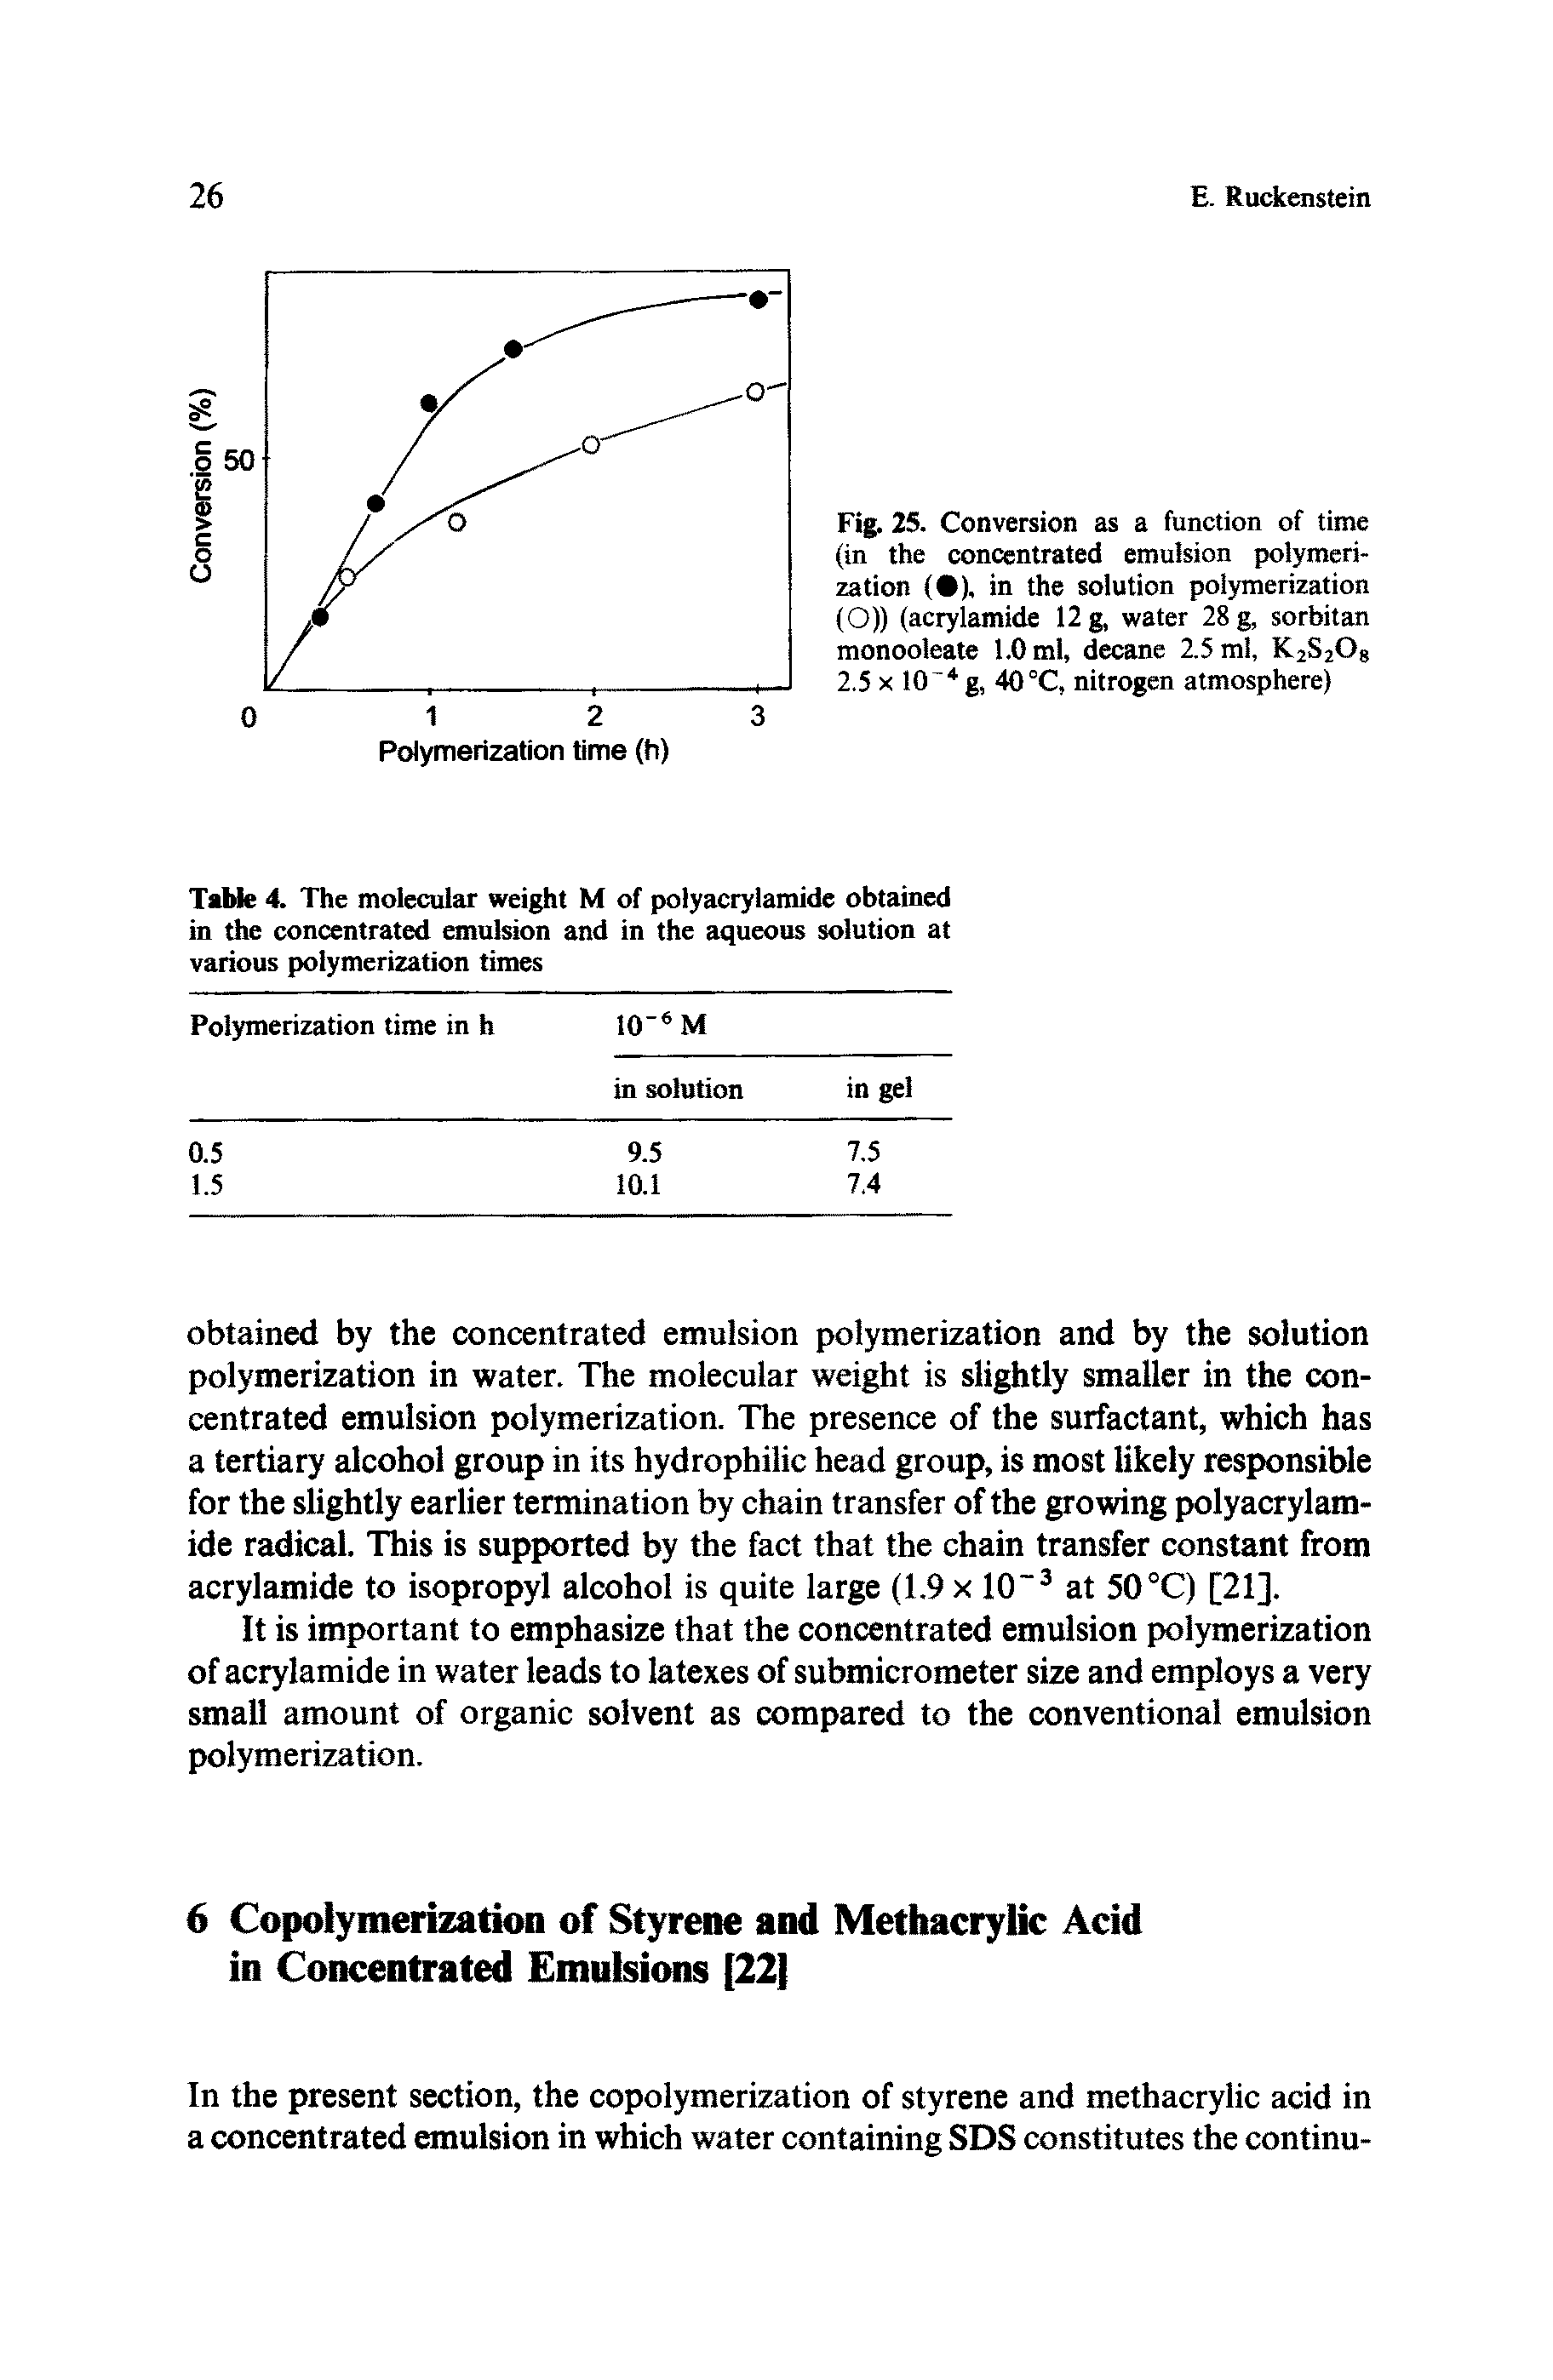 Fig. 25. Conversion as a function of time (in the concentrated emulsion polymerization ( ). in the solution polymerization (O)) (acrylamide 12 g, water 28 g, sorbitan monooleate 1.0 ml, decane 2.5 ml, K2S2Oe 2.5 x 10 4 g, 40 °C, nitrogen atmosphere)...